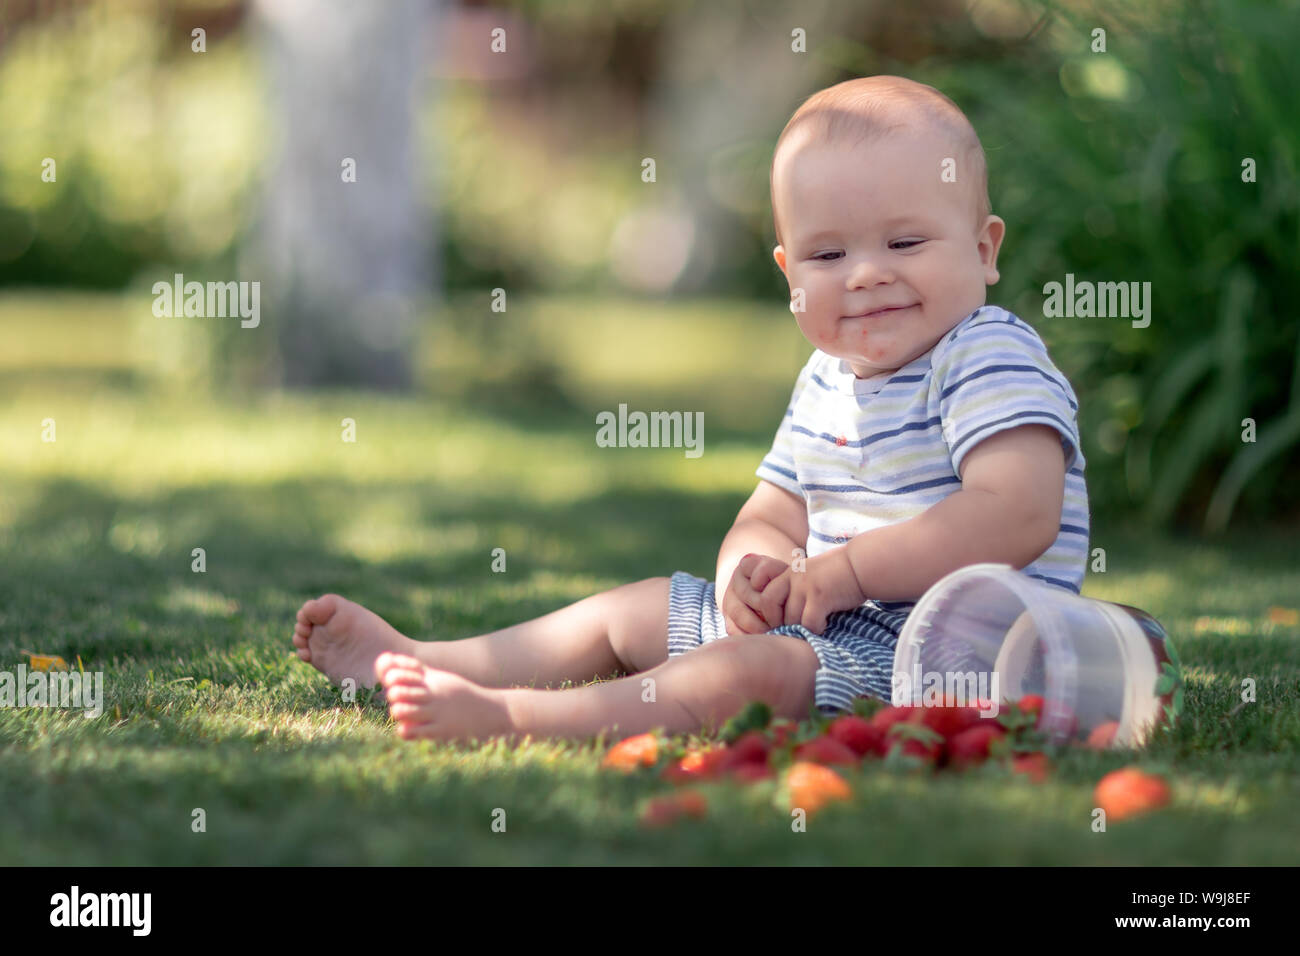 Naughty  boy spread out strawberries on the grass and smiles Stock Photo